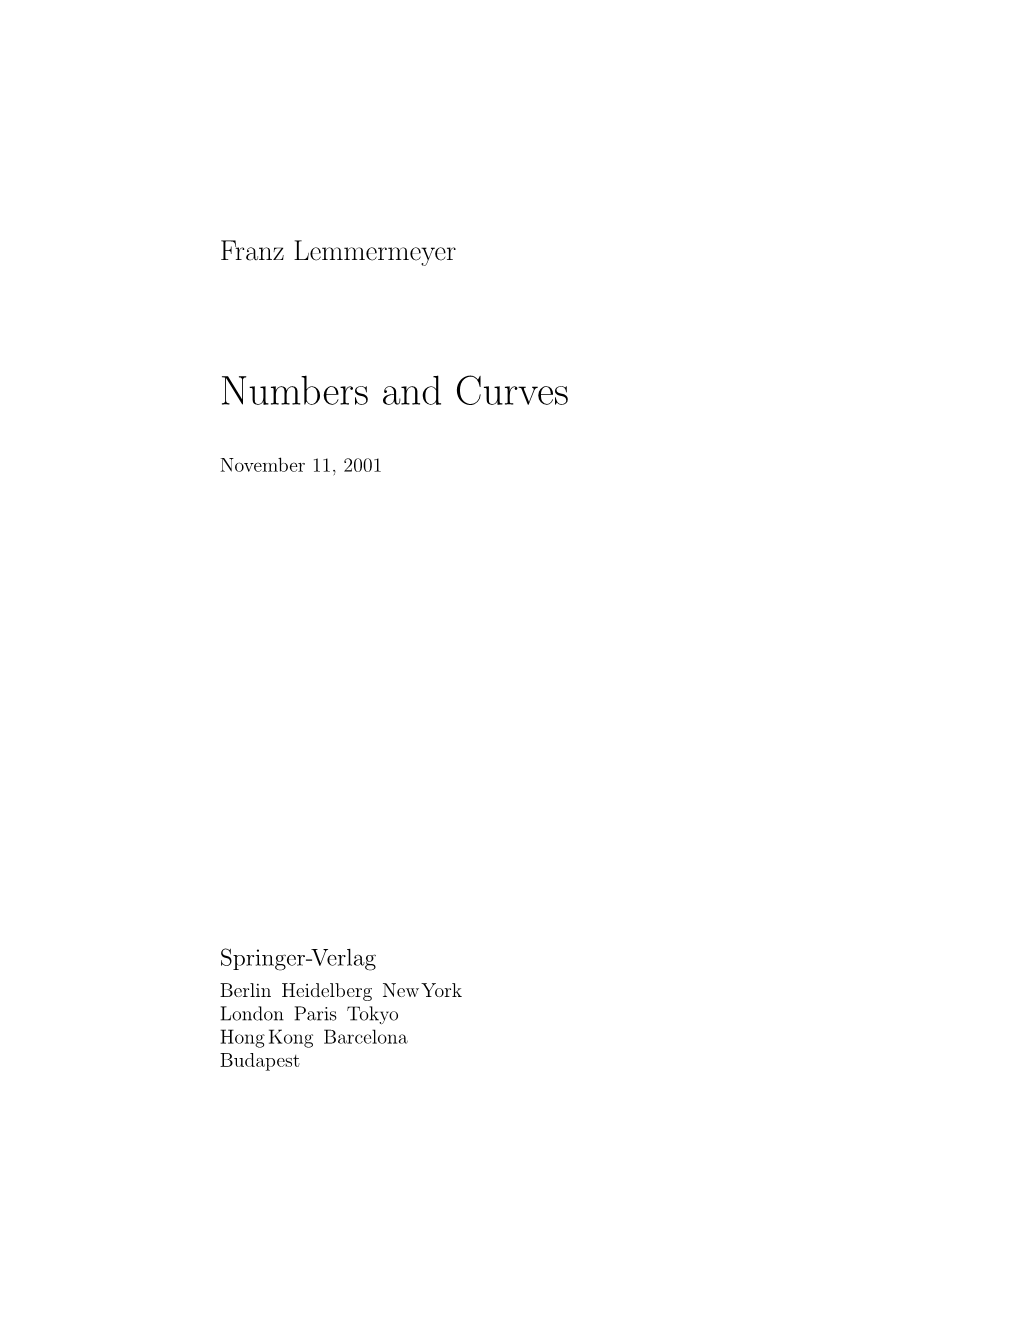 Numbers and Curves